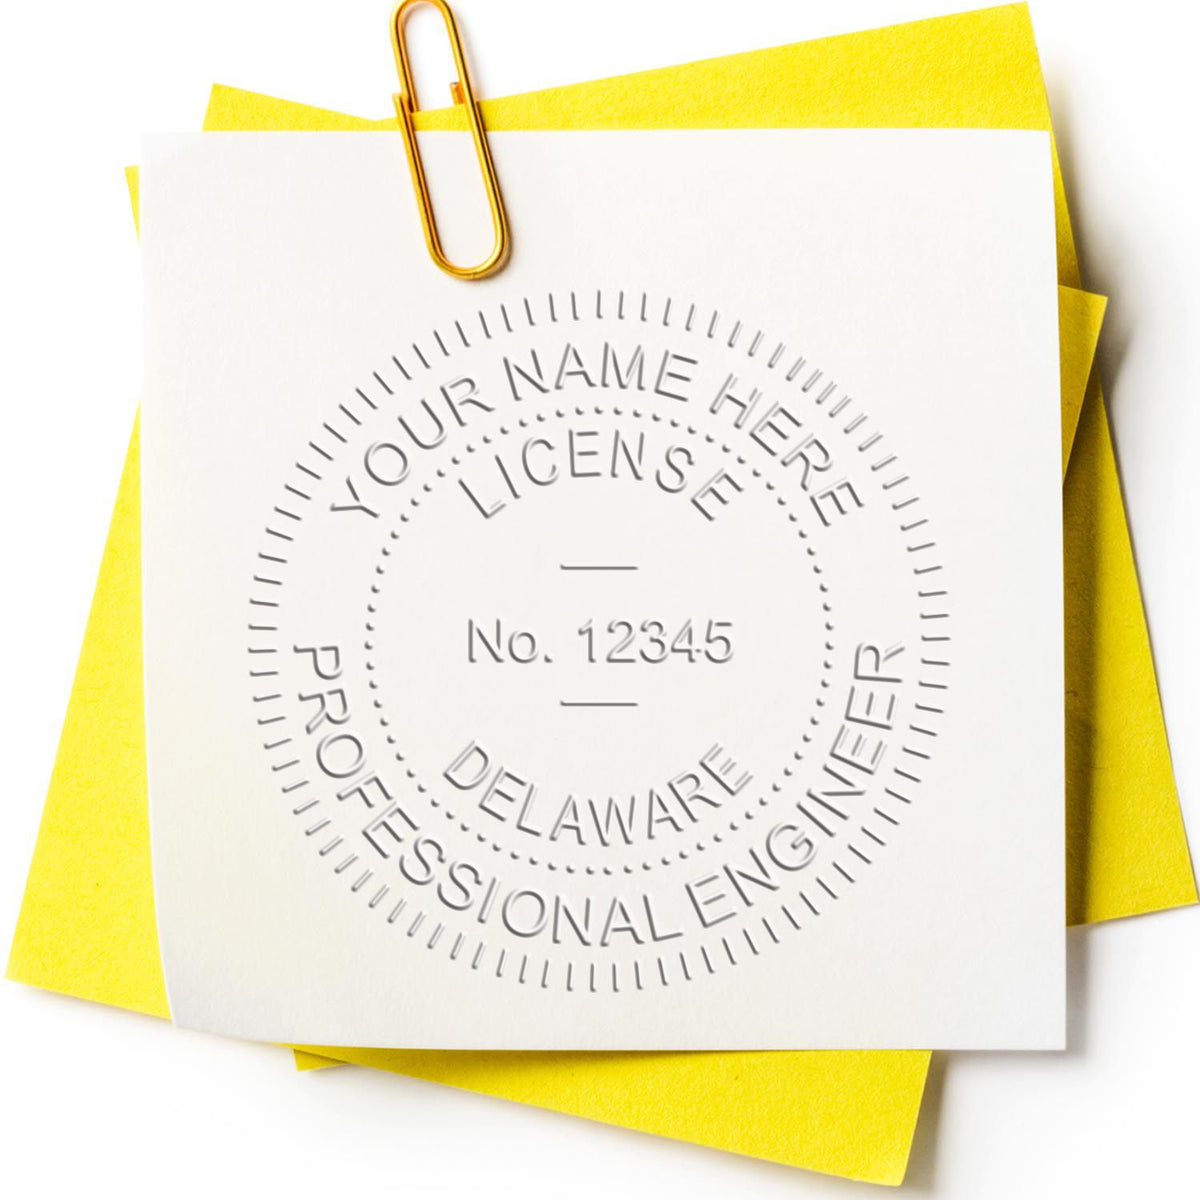 An in use photo of the Hybrid Delaware Engineer Seal showing a sample imprint on a cardstock